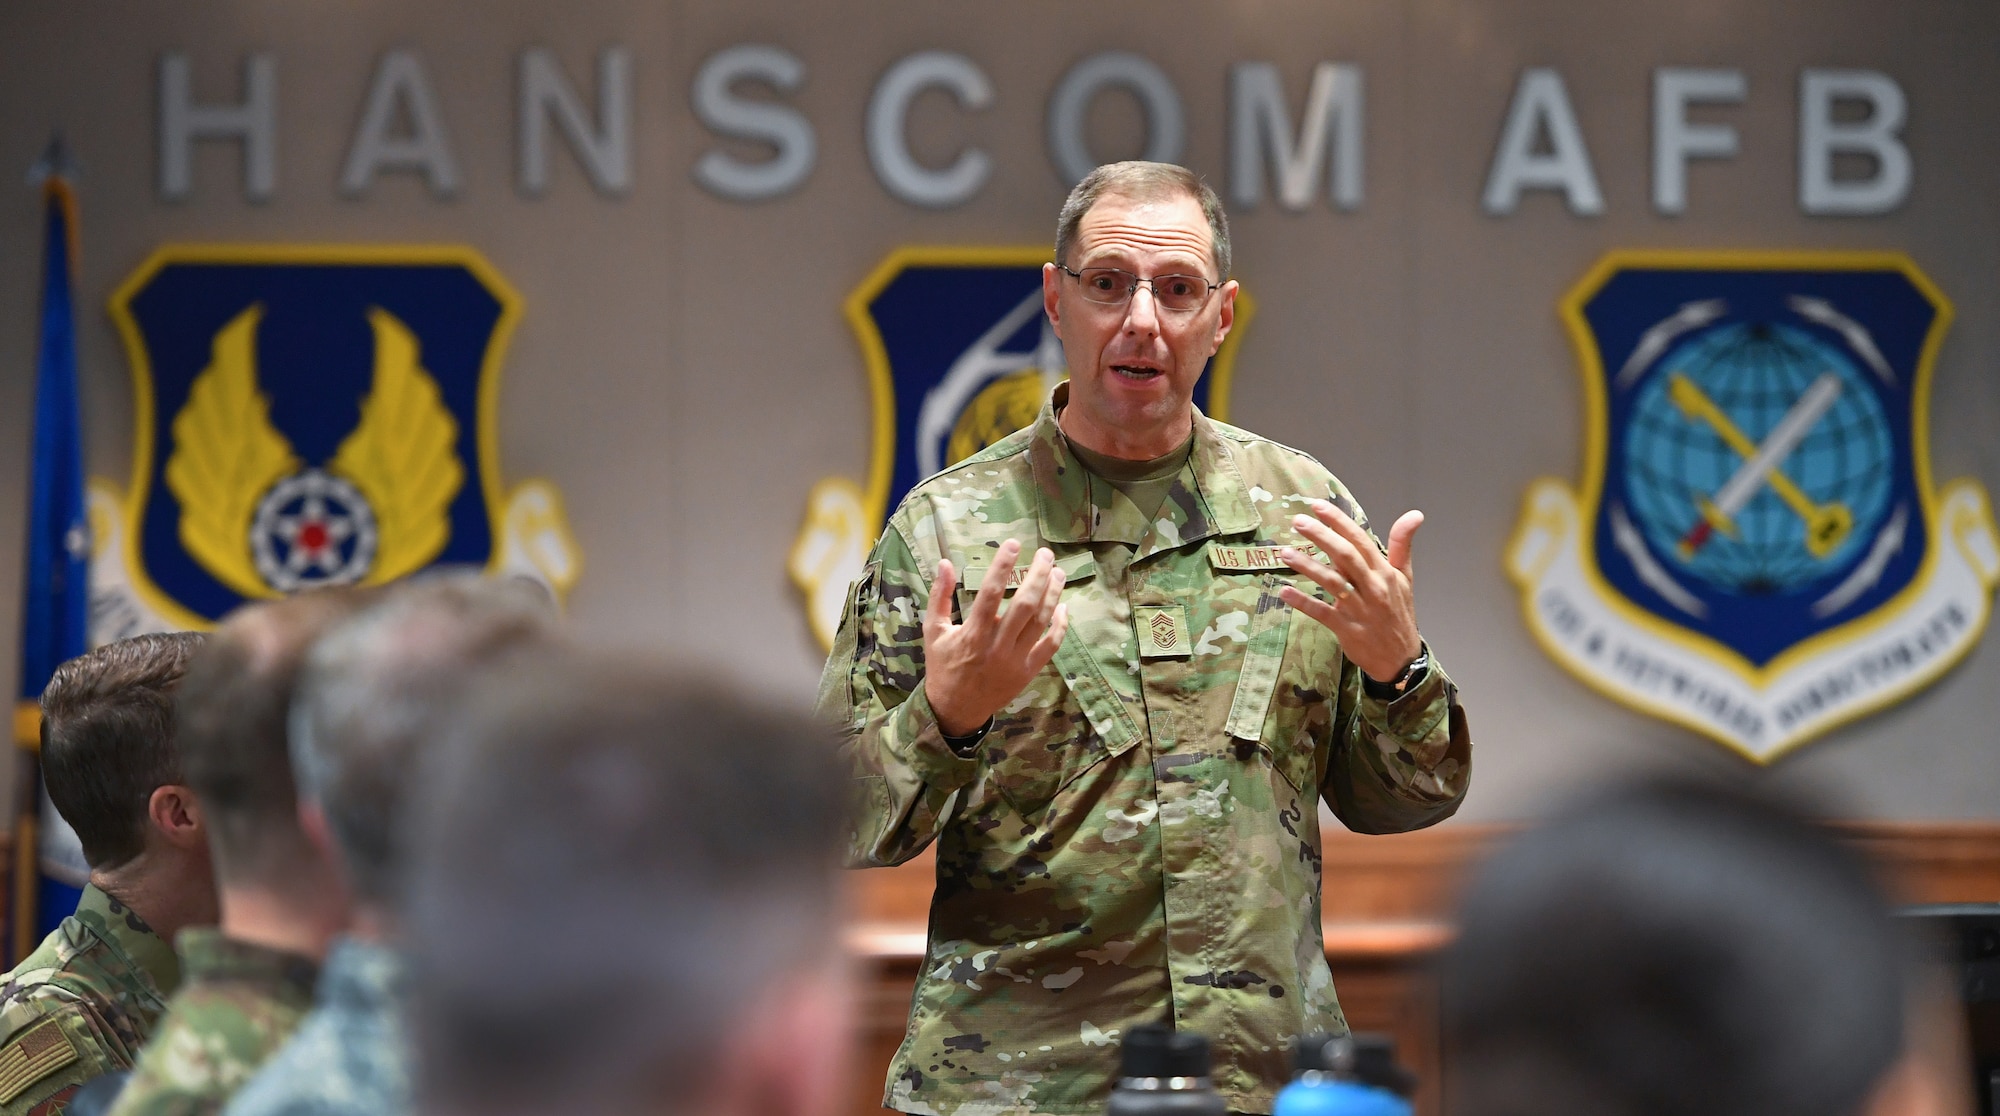 Command chiefs hold panel discussion